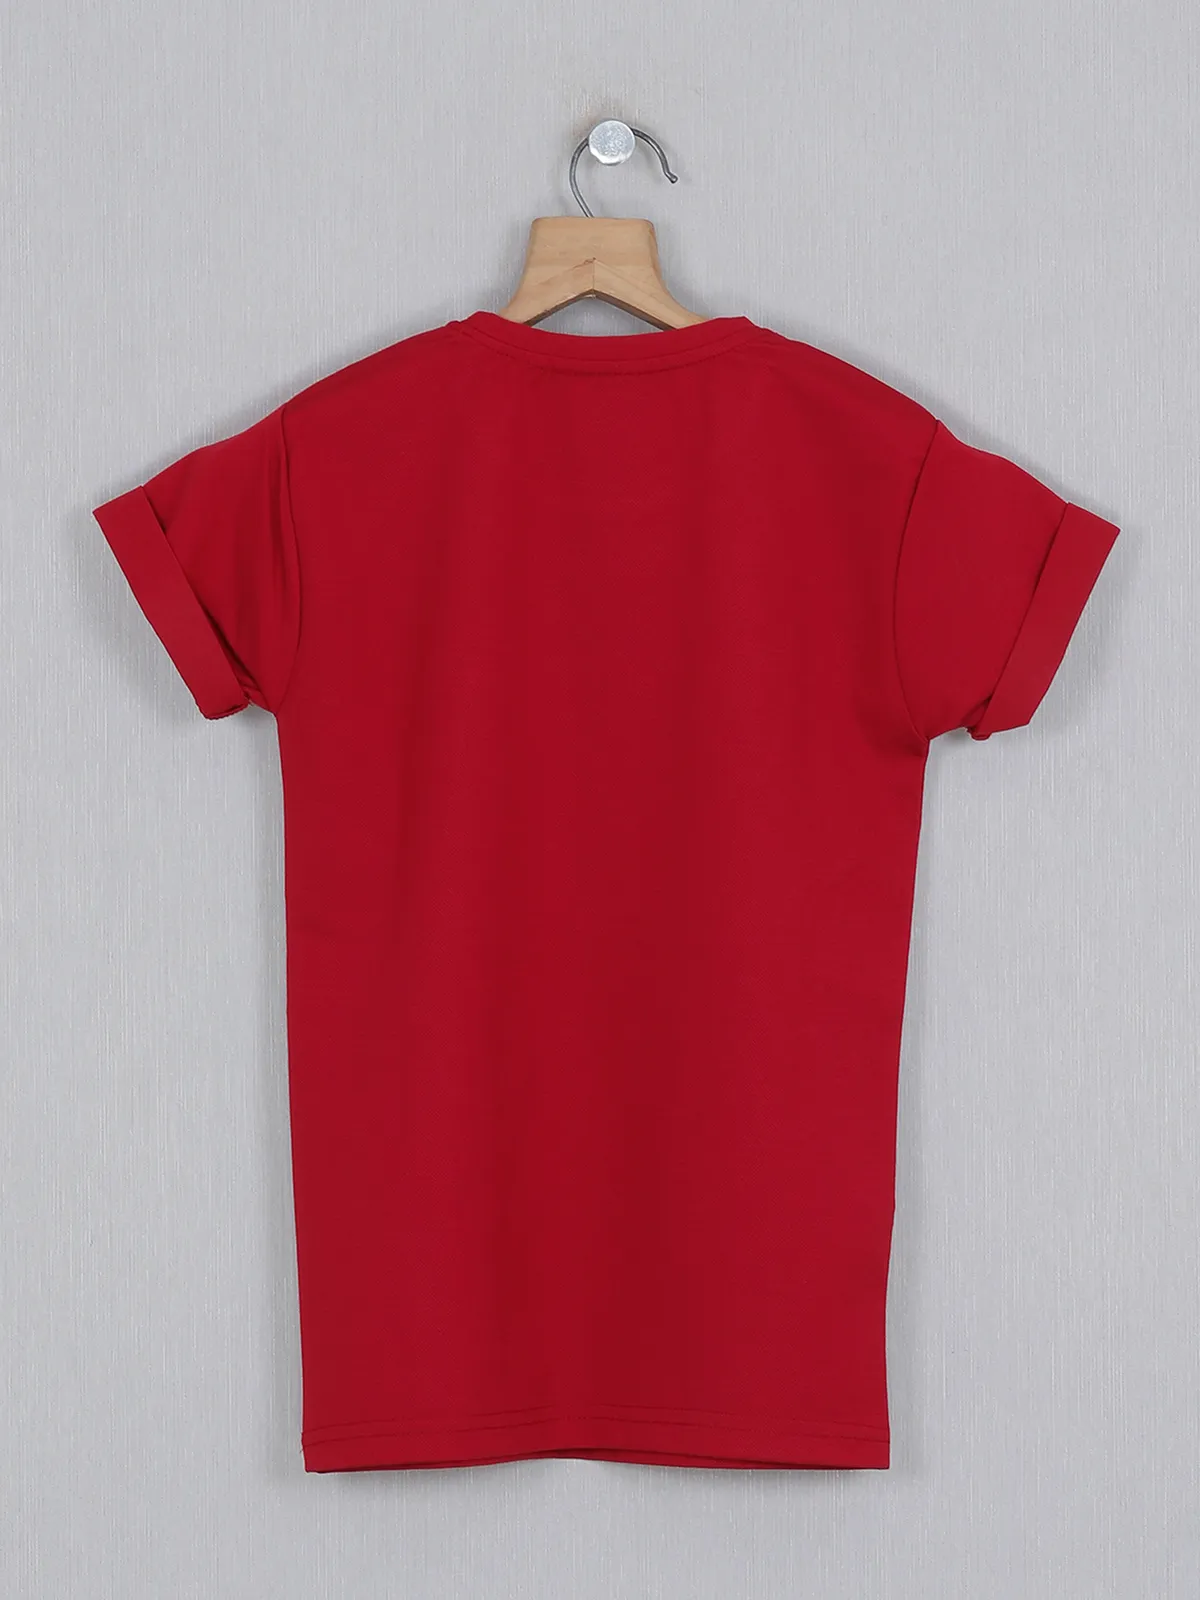 Danaboi red casual printed t-shirt